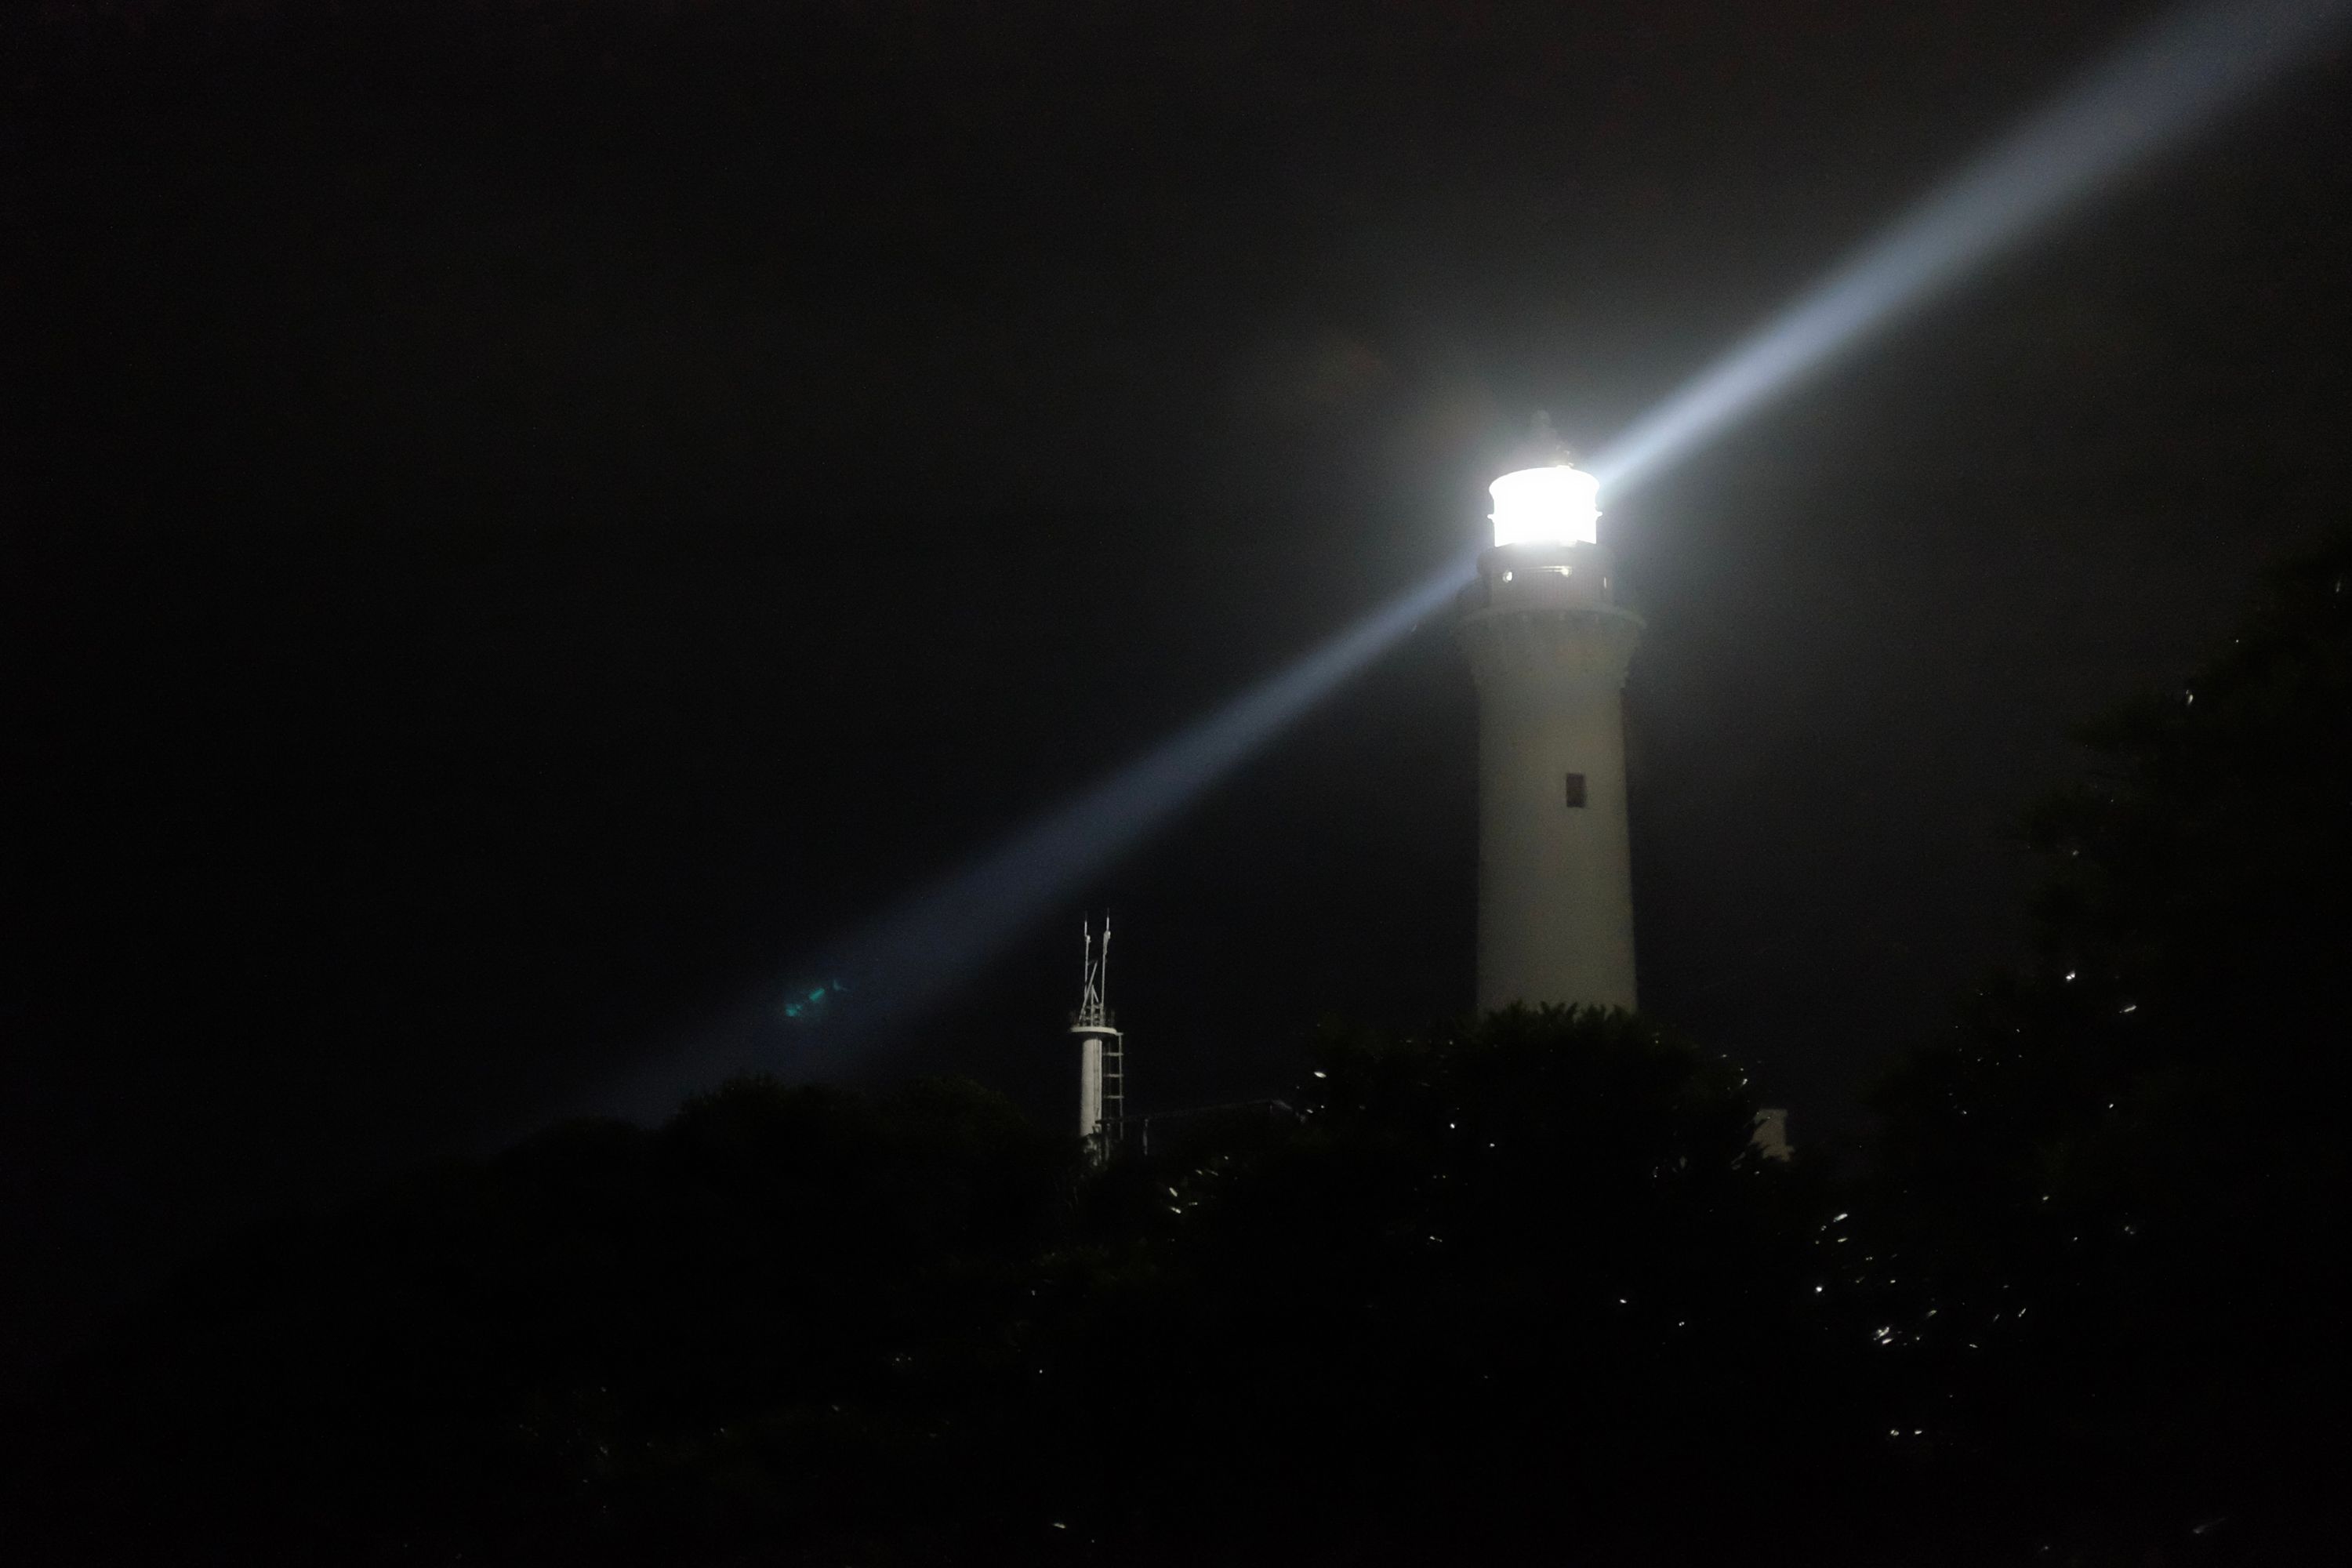 A lighthouse casts a beam of light in the night sky.